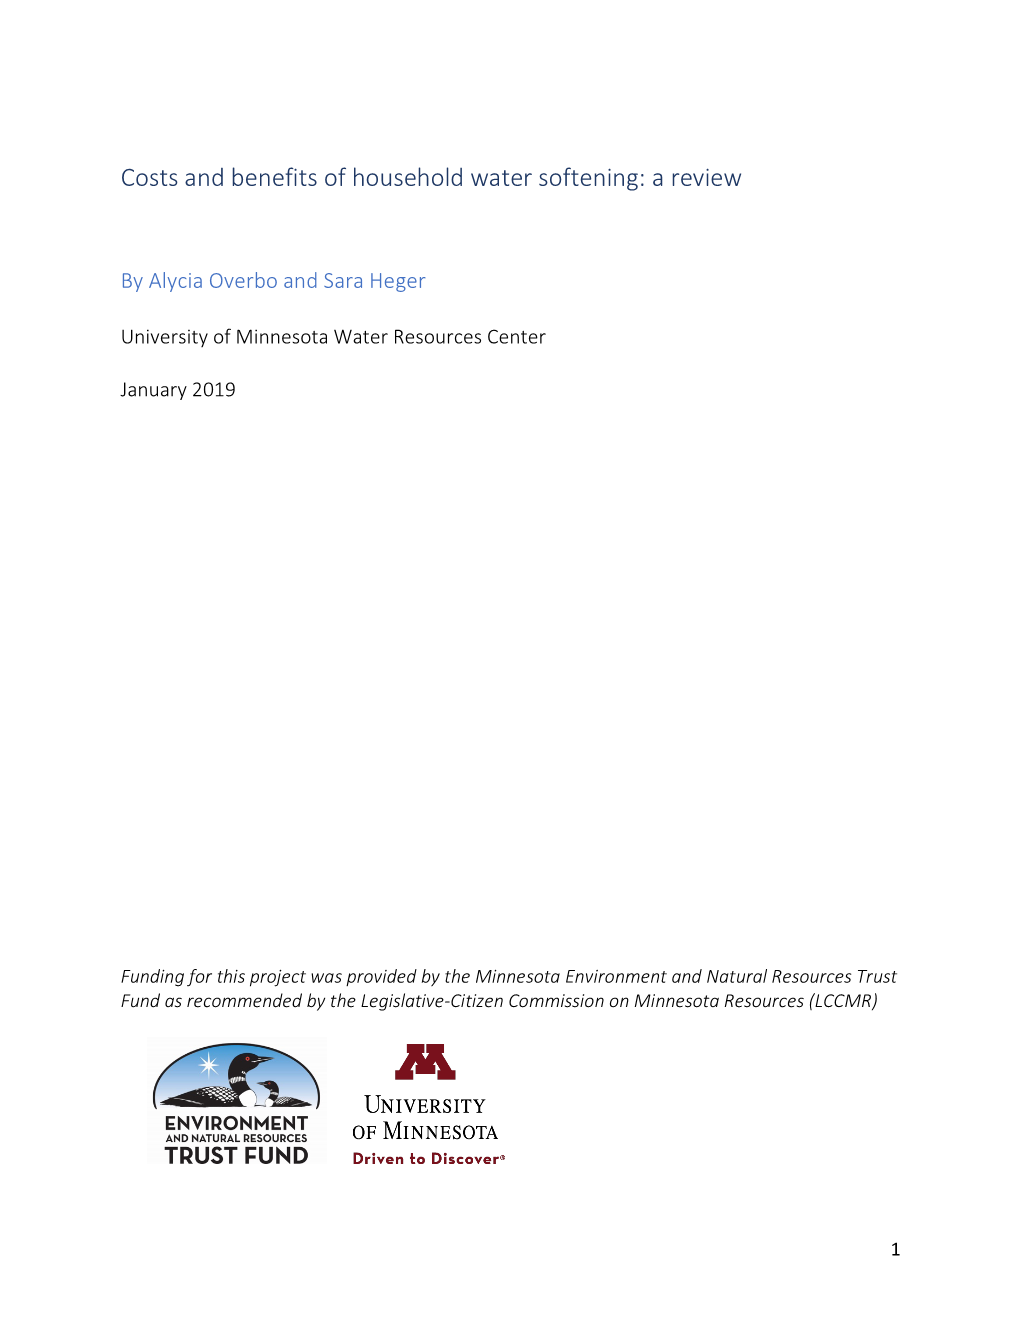 Costs and Benefits of Household Water Softening: a Review